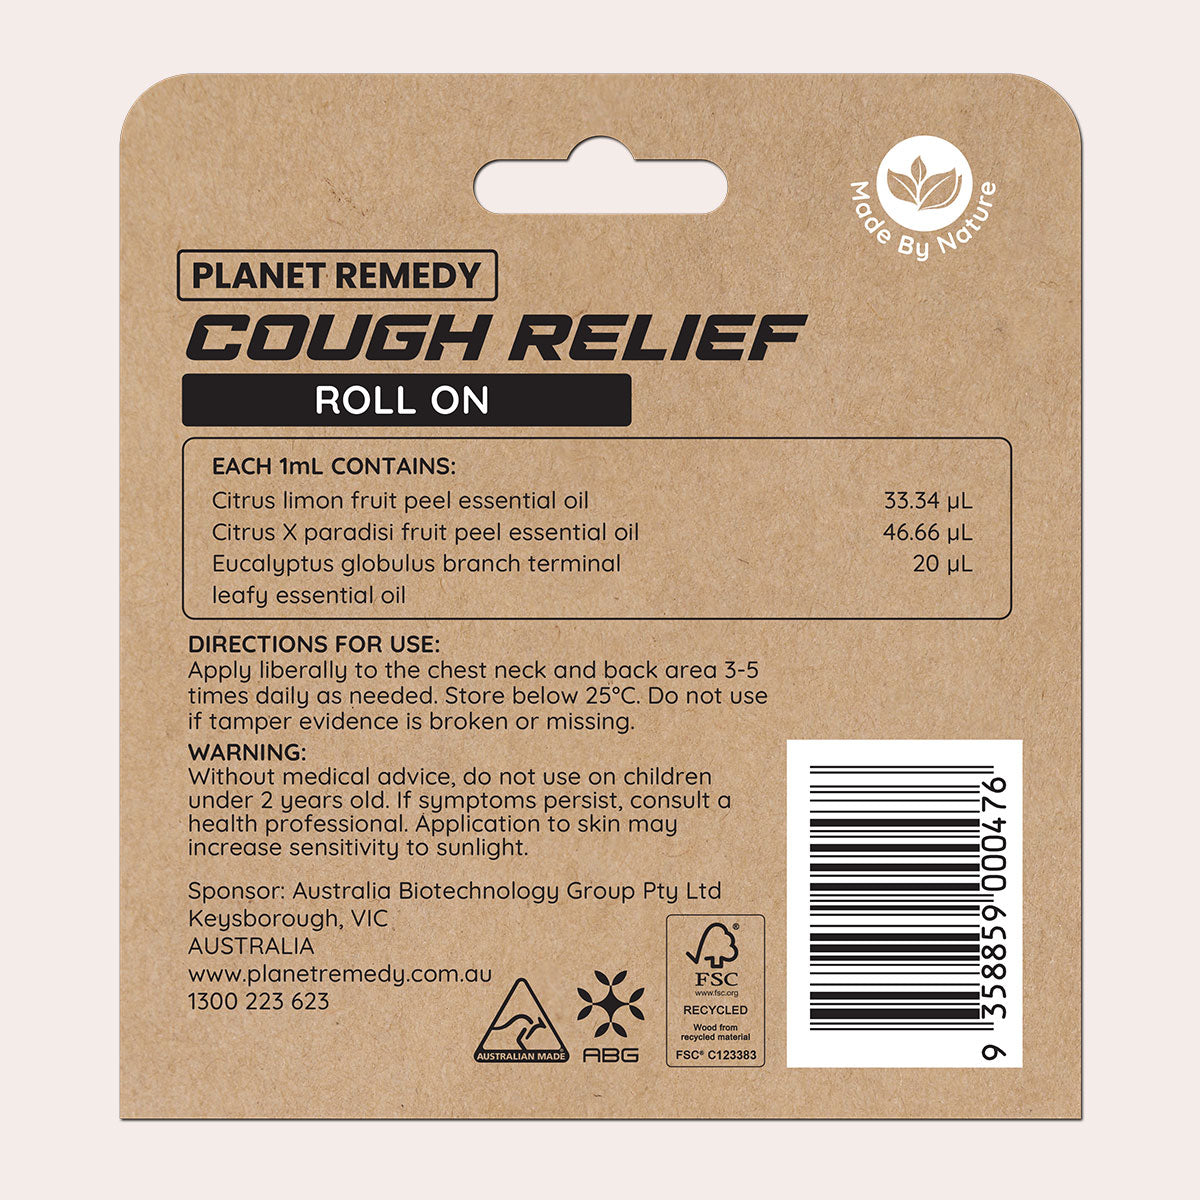 Planet Remedy Cough Relief Roll On